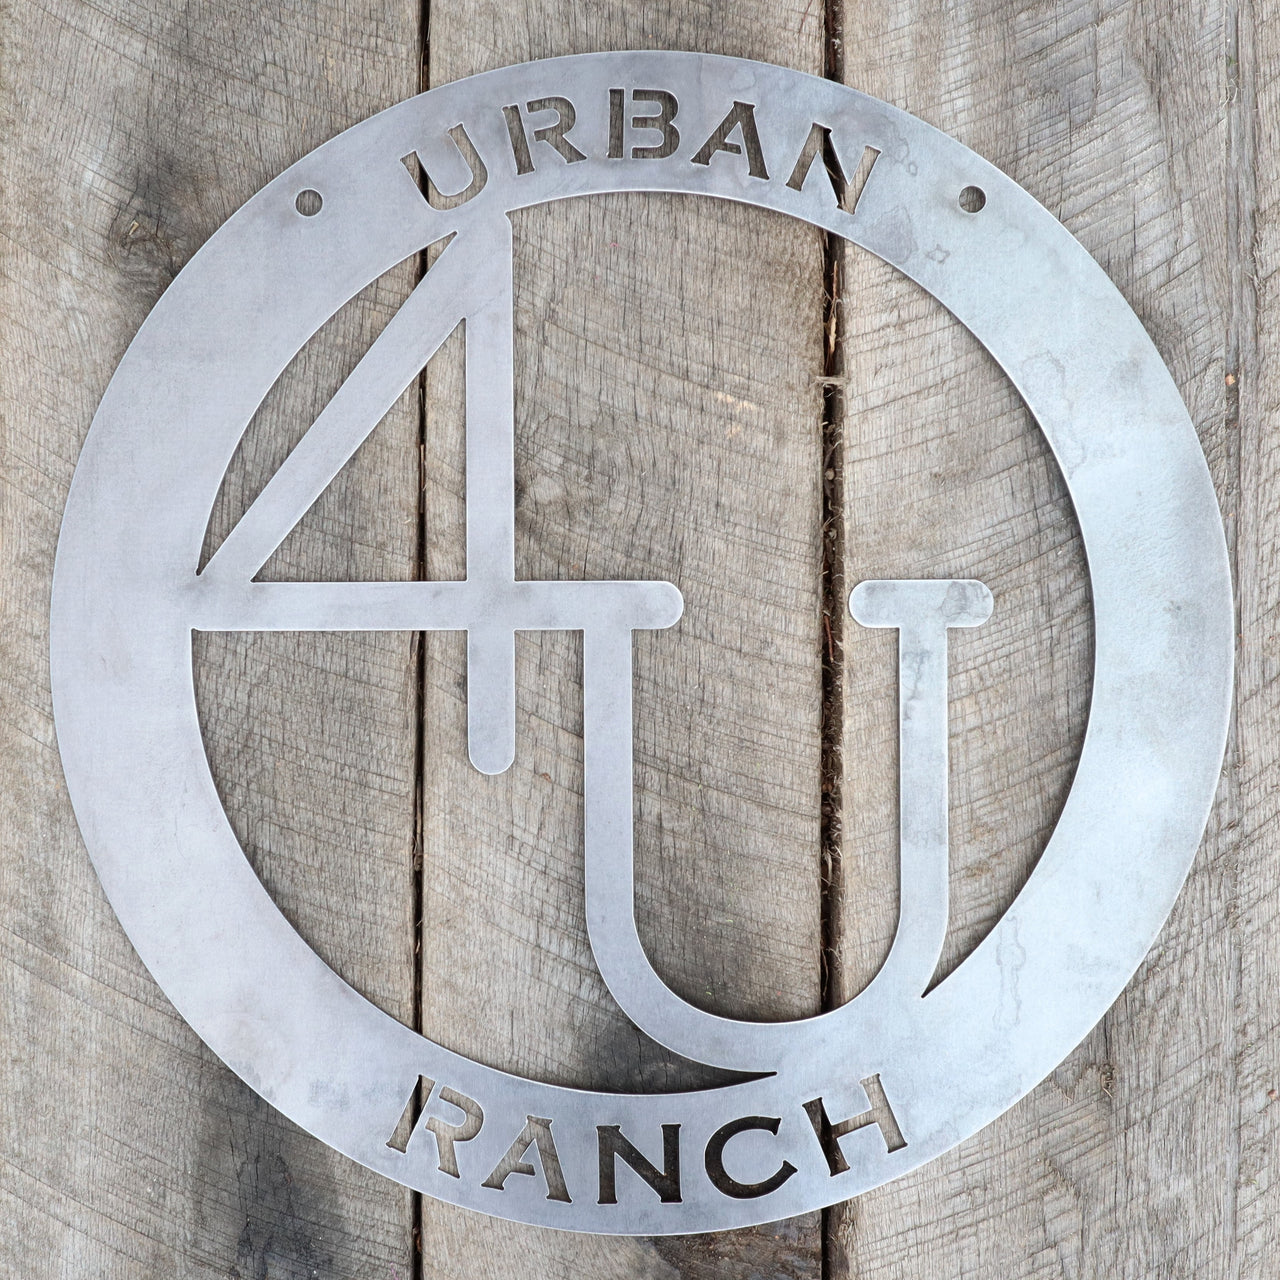 Your Own Custom Brand! Metal Cattle Brand Sign - Ranch, Farm